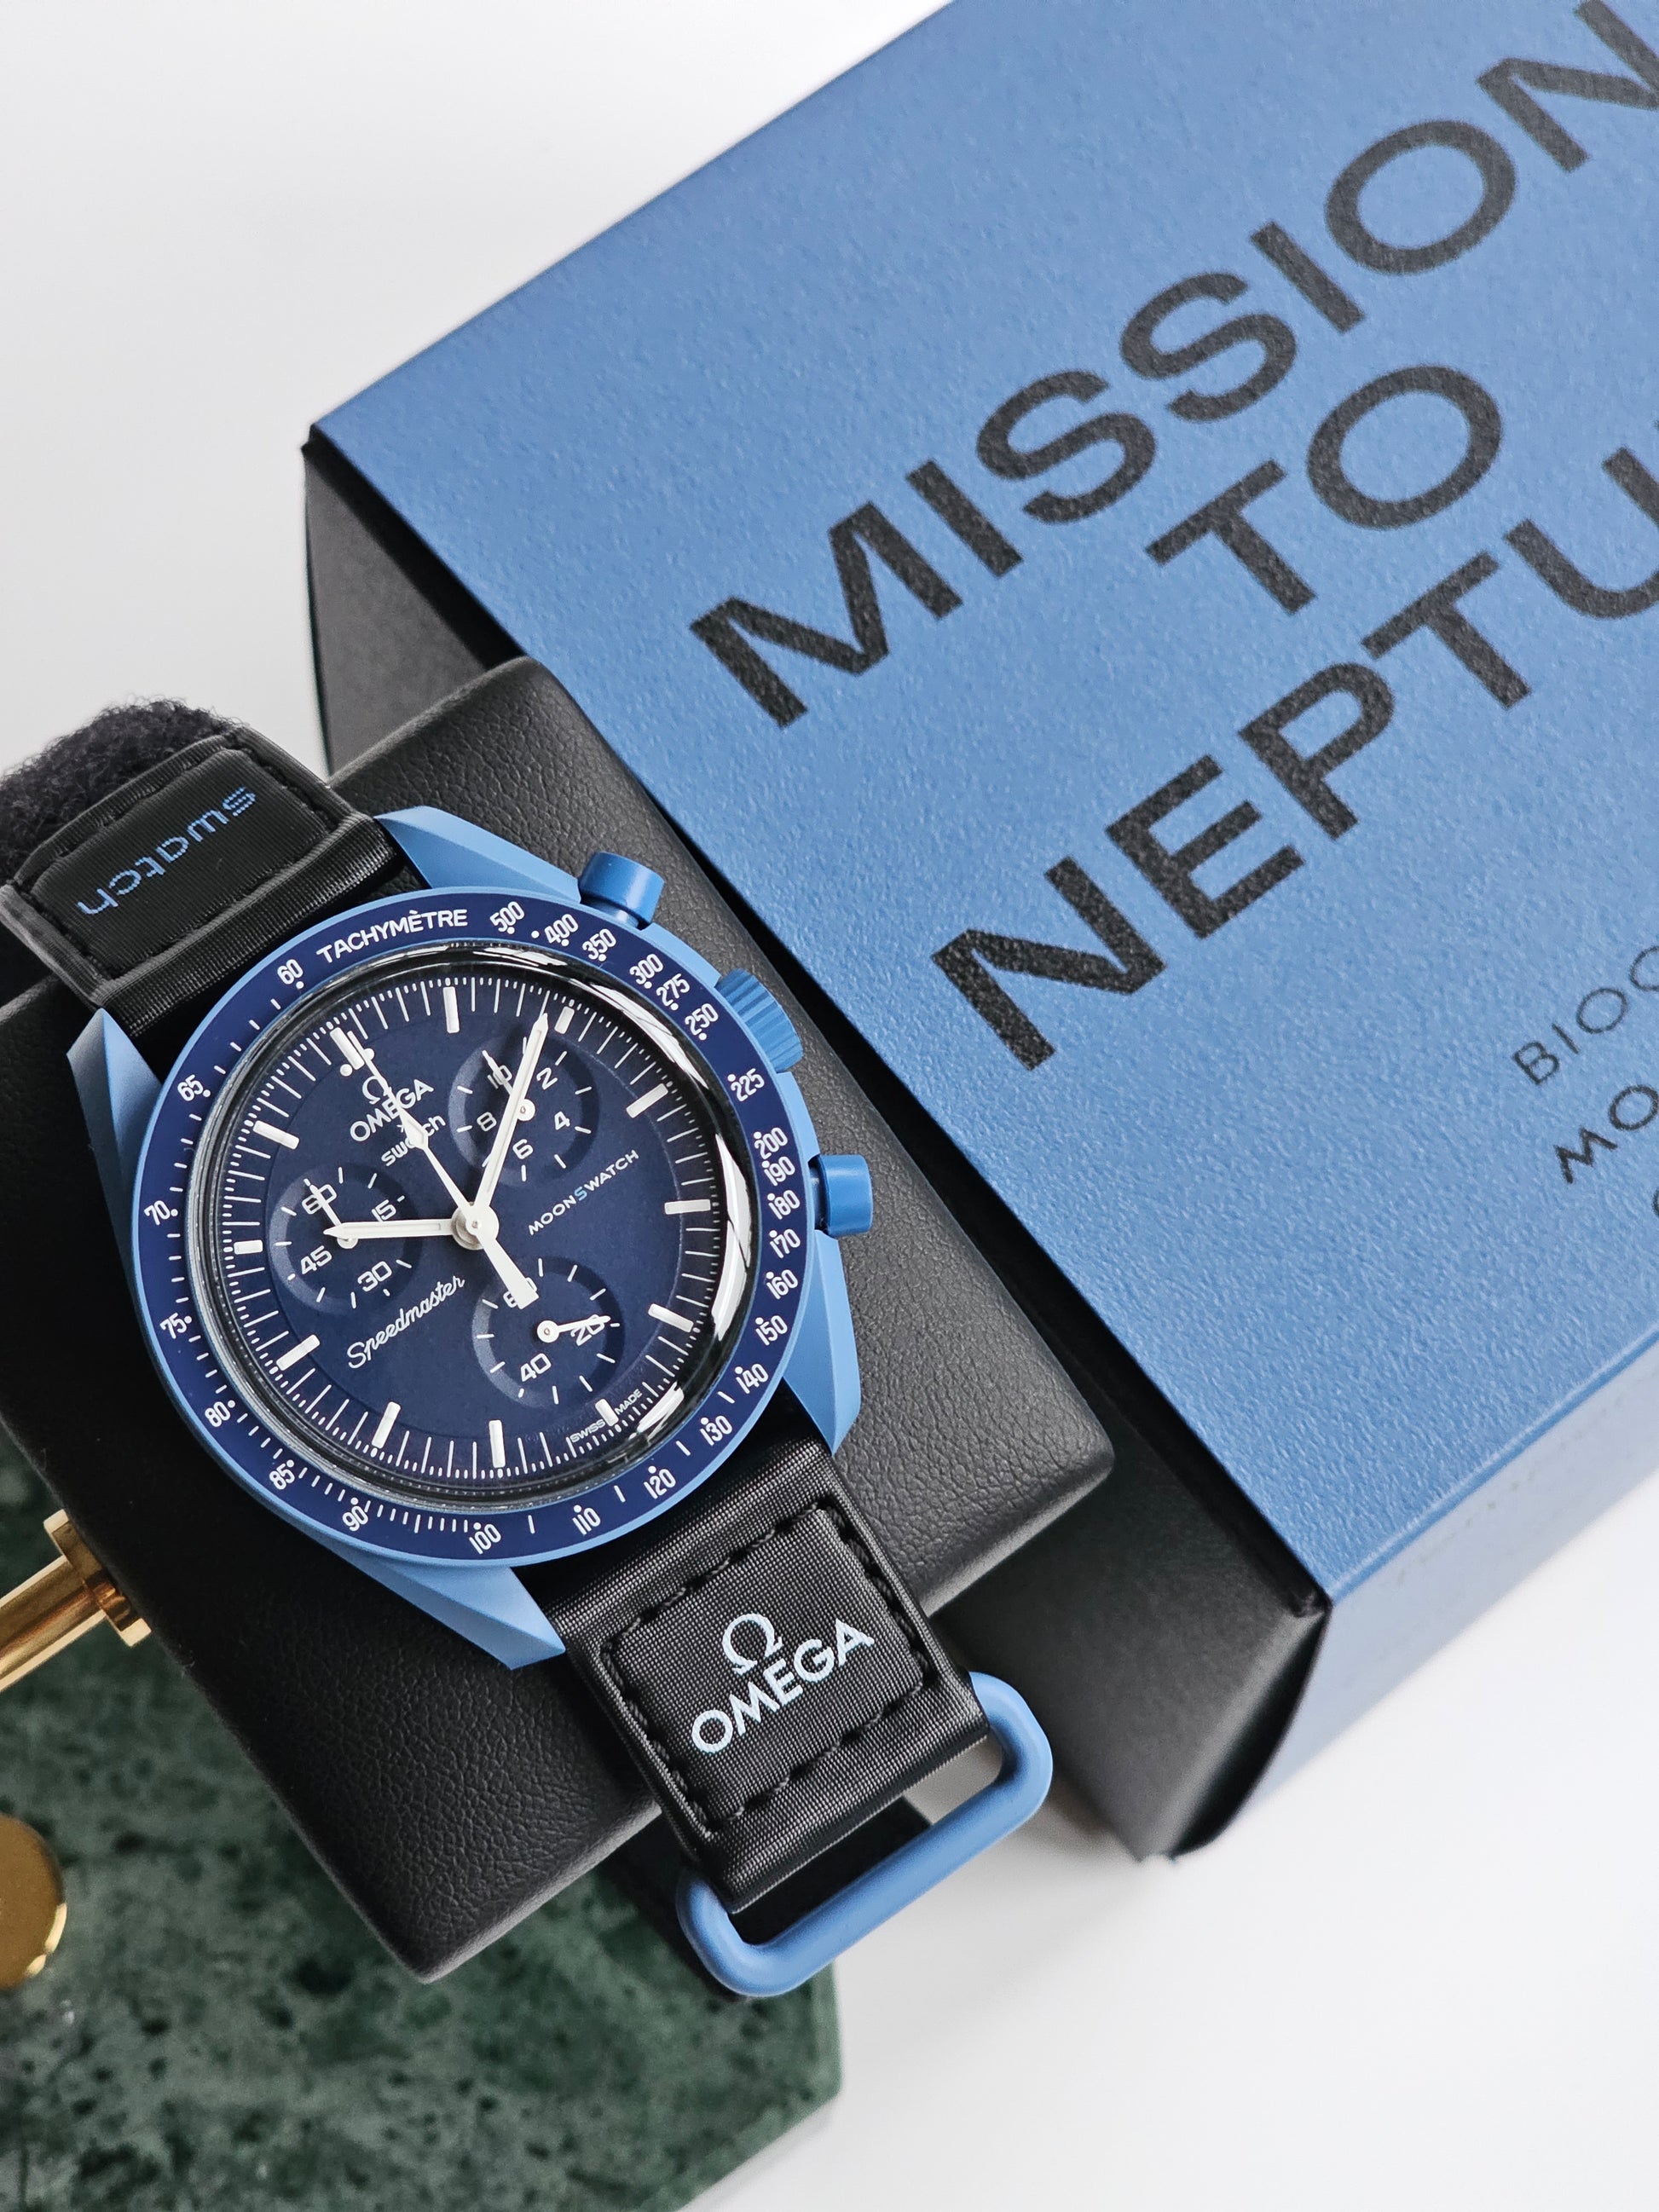 Swatch x Omega Mission to Neptune Swatch Watch and picture of box with text Mission to Neptune Blue Colour swatch x Omega Mission to Neptune Swatch Watch. Model number SO33N100